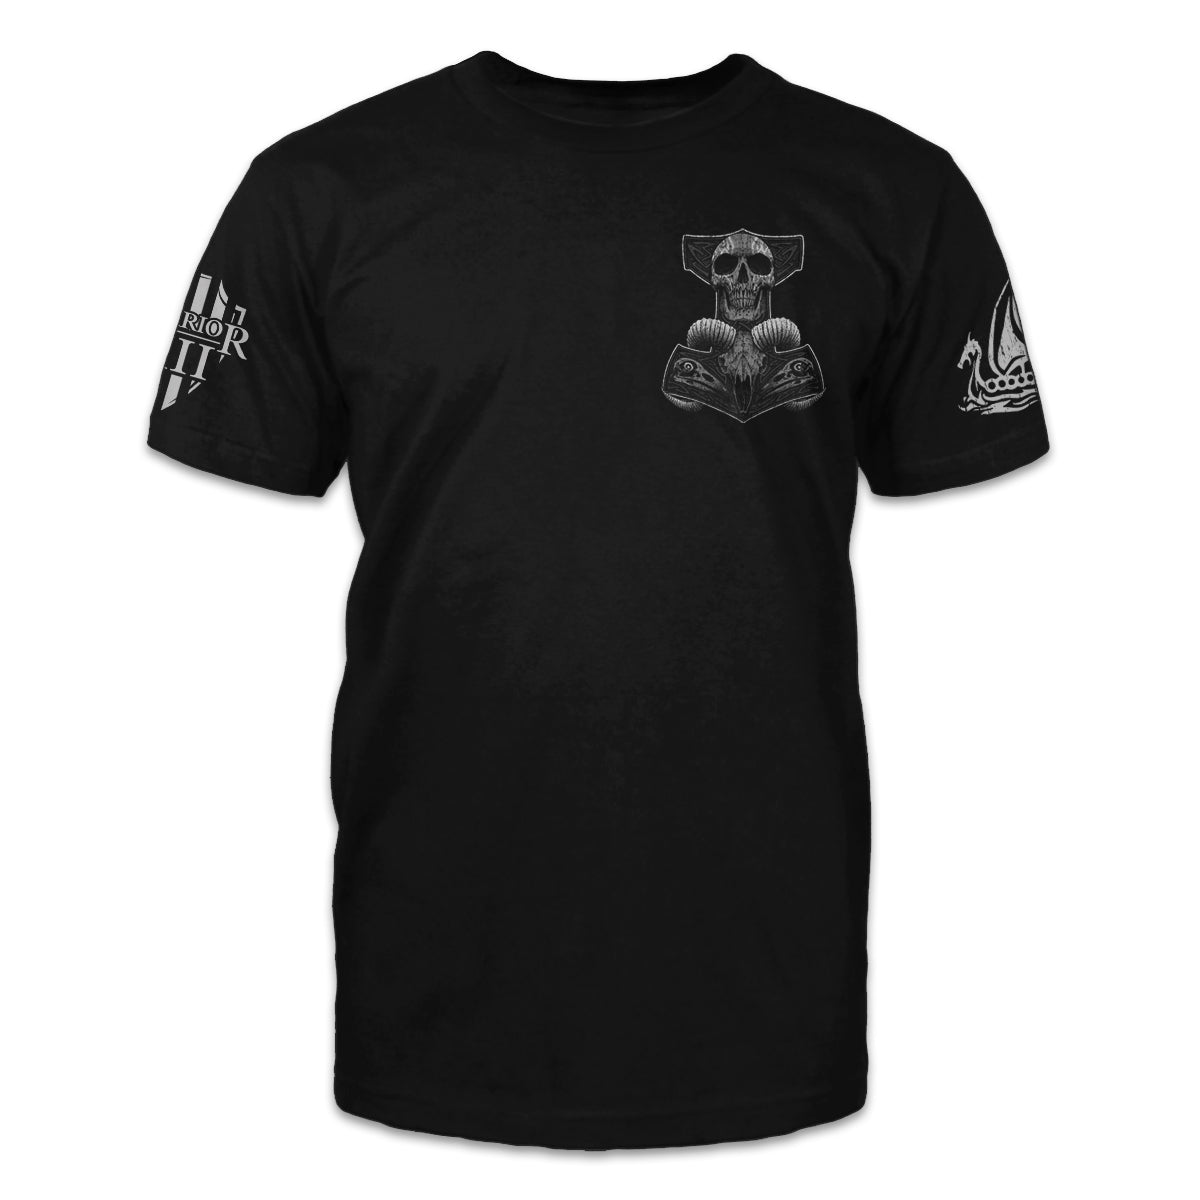 A  black t-shirt features a Thor's hammer skull design. The ram skull symbolizes the rams that pulled Thor's chariot printed n the front left chest.